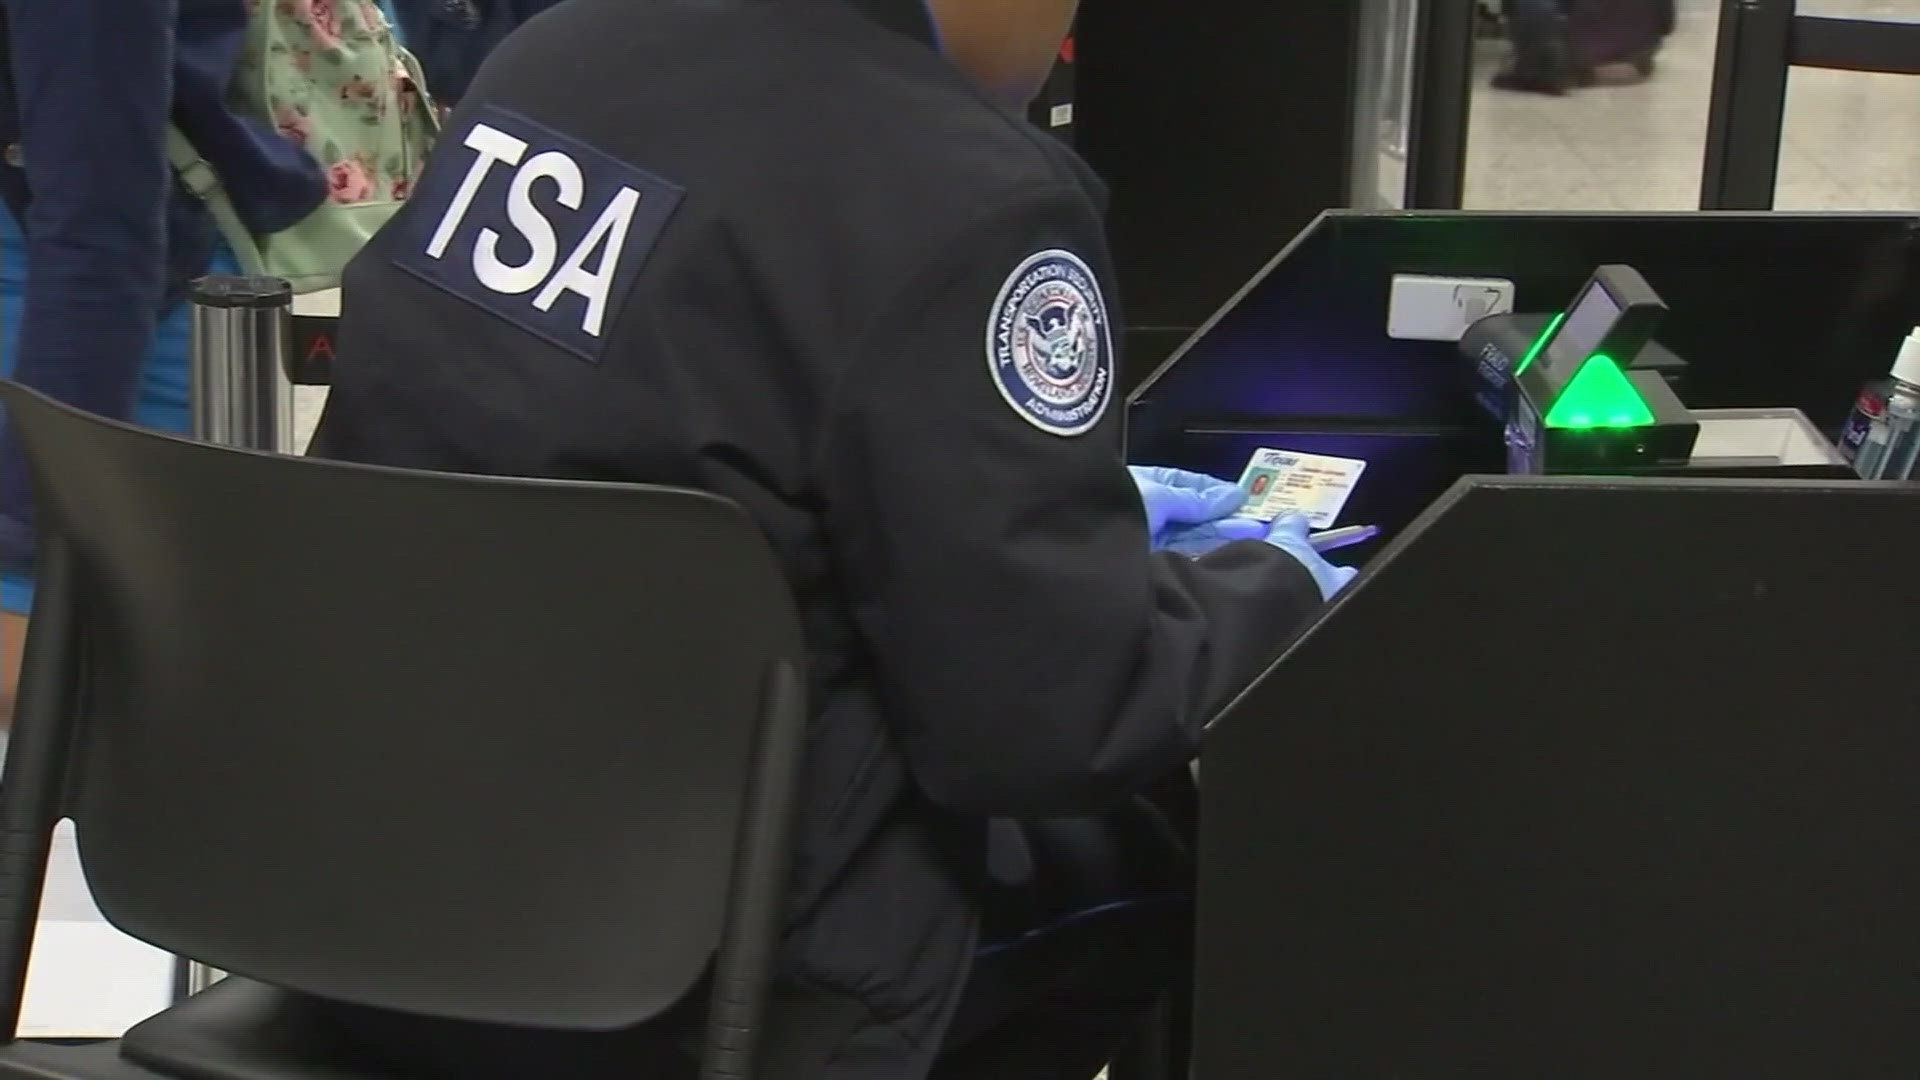 Nationwide, TSA stopped 3,251 firearms at airport checkpoints through the first half of 2023.